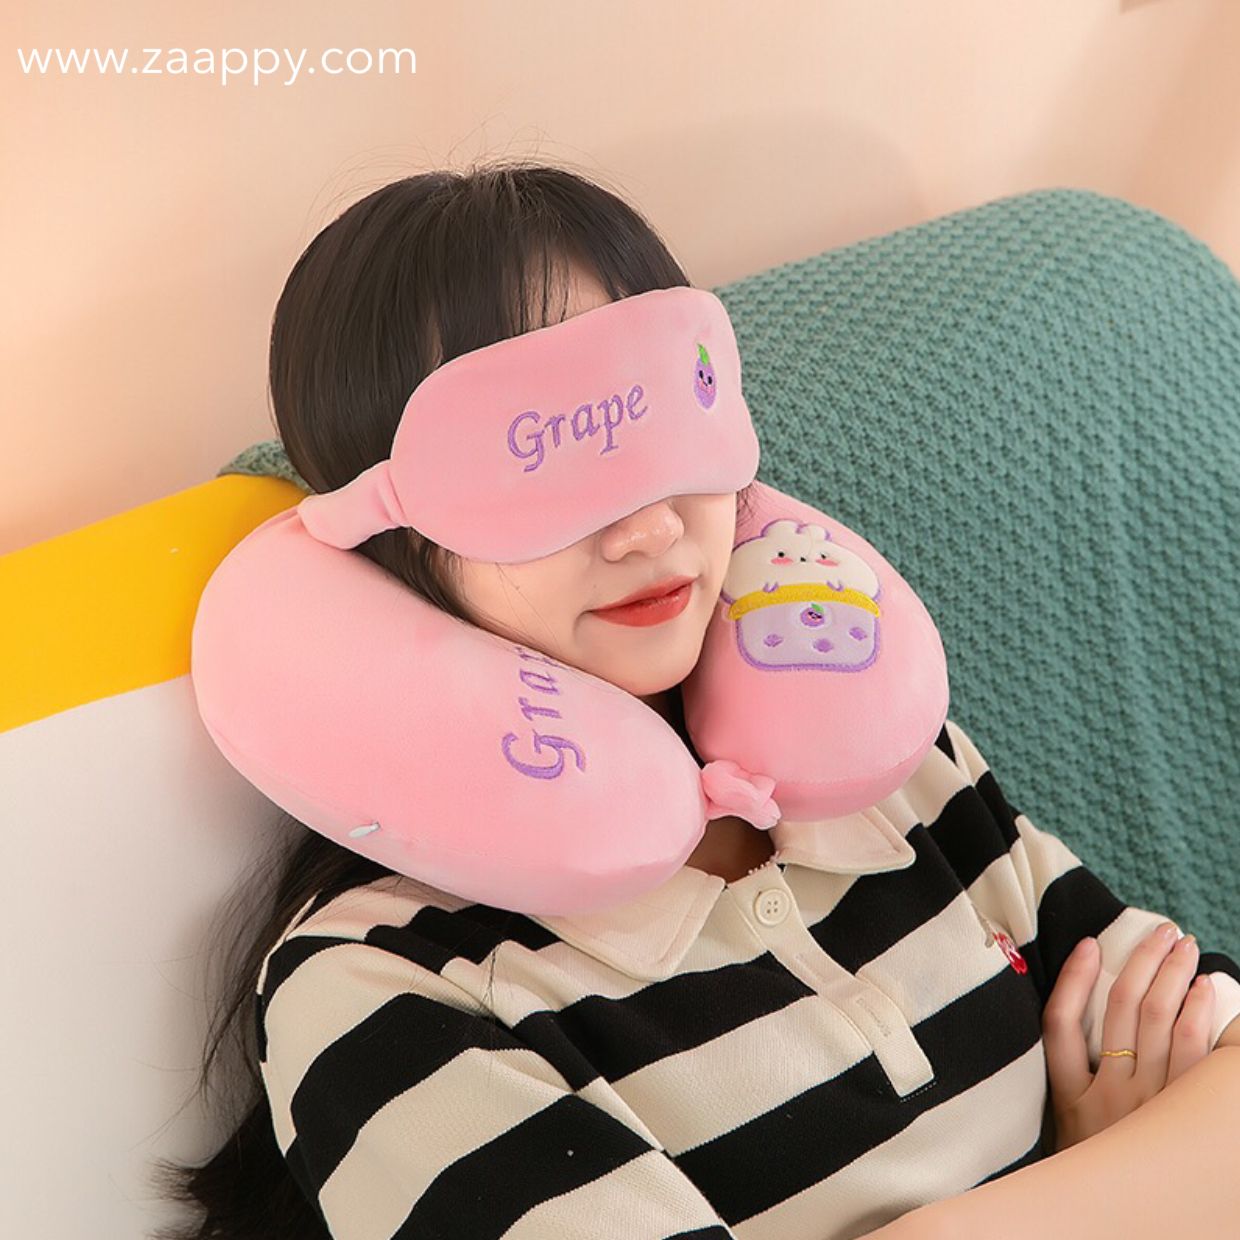 U-Shaped Soft Memory Form Neck Pillow and Sleeping Eye Mask For Travel Purpose | Cute Fruit Printed Zaappy